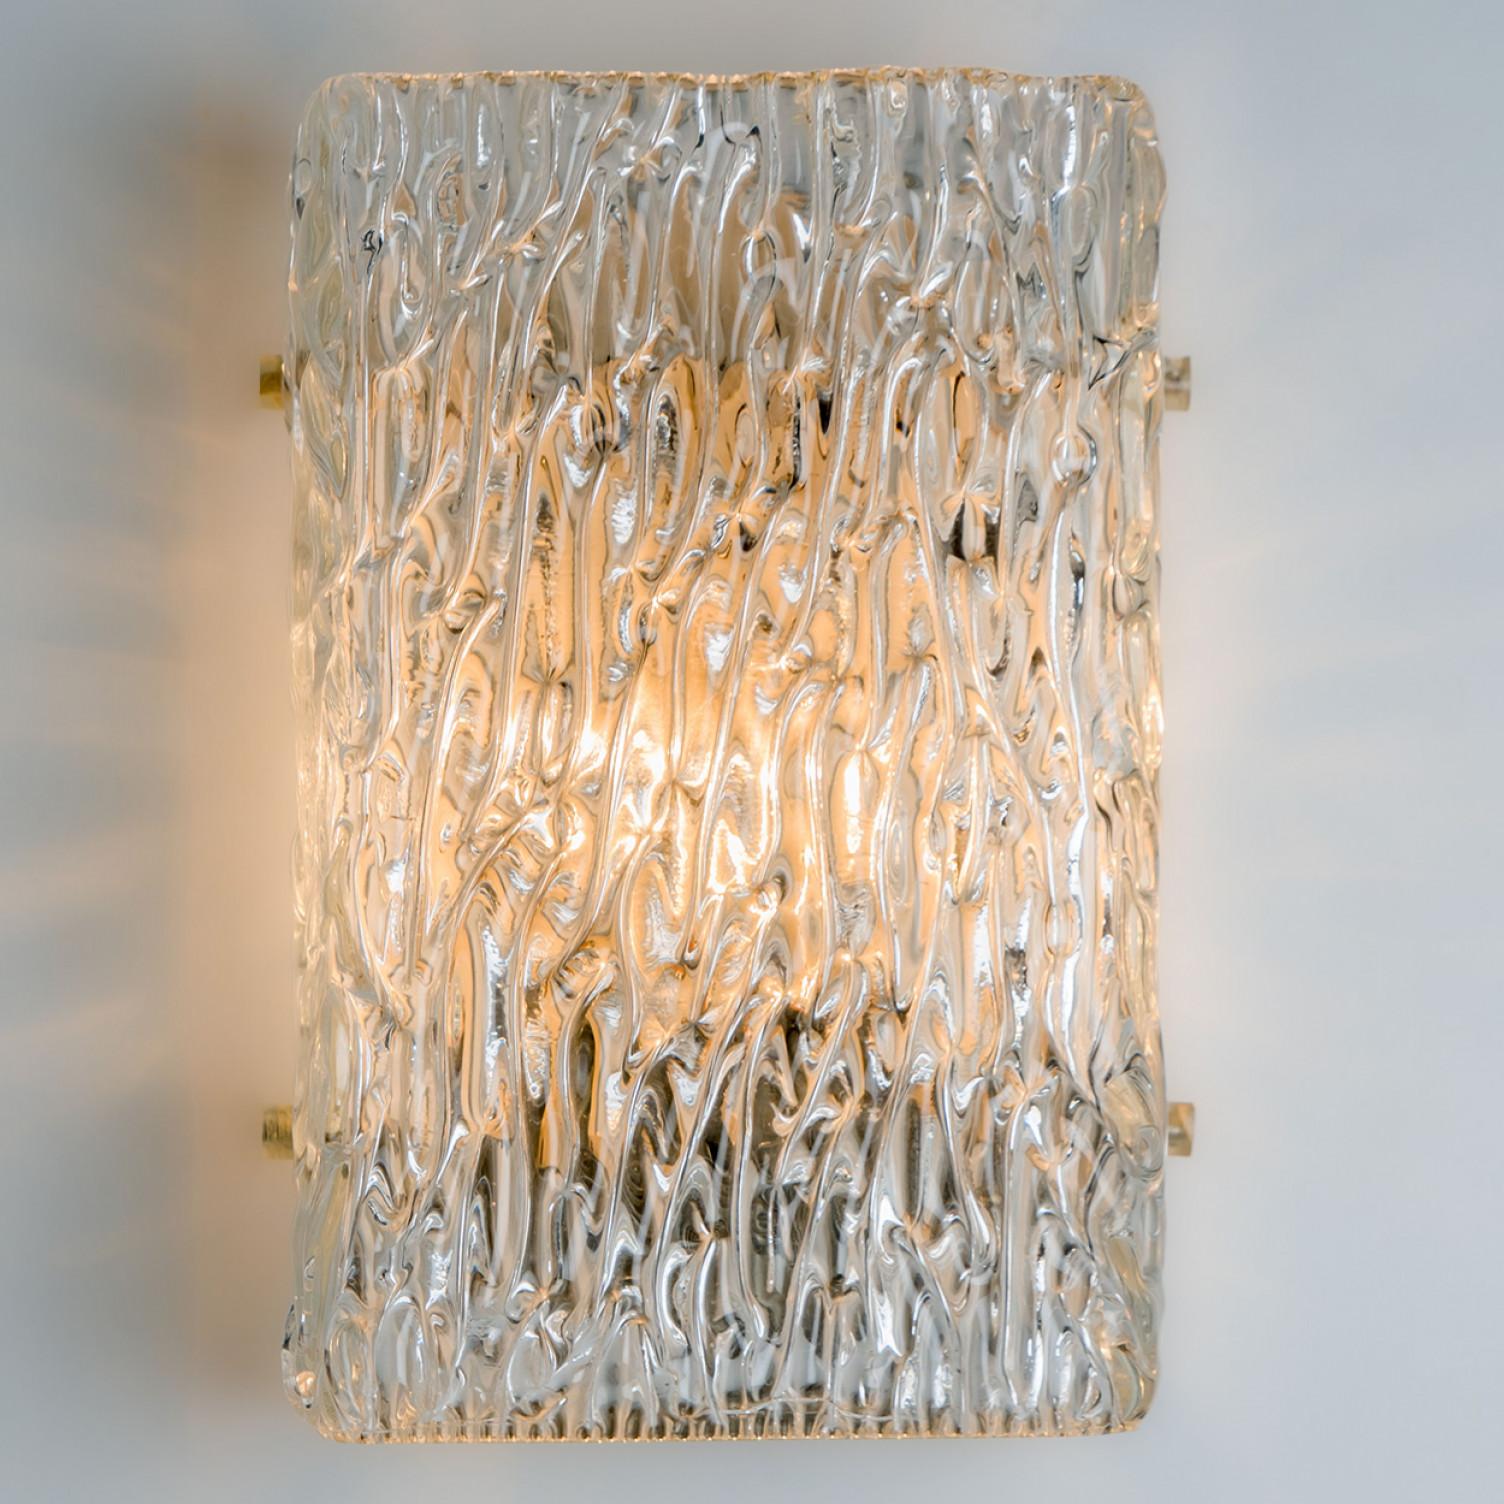 Beautiful high quality light fixture made by Kalmar Leuchten, Austria. Manufactured in mid century, circa 1970 (at the end of 1960s and beginning of 1970s).

This wall light features lights made of handmade wave-textured glass. The sides refract